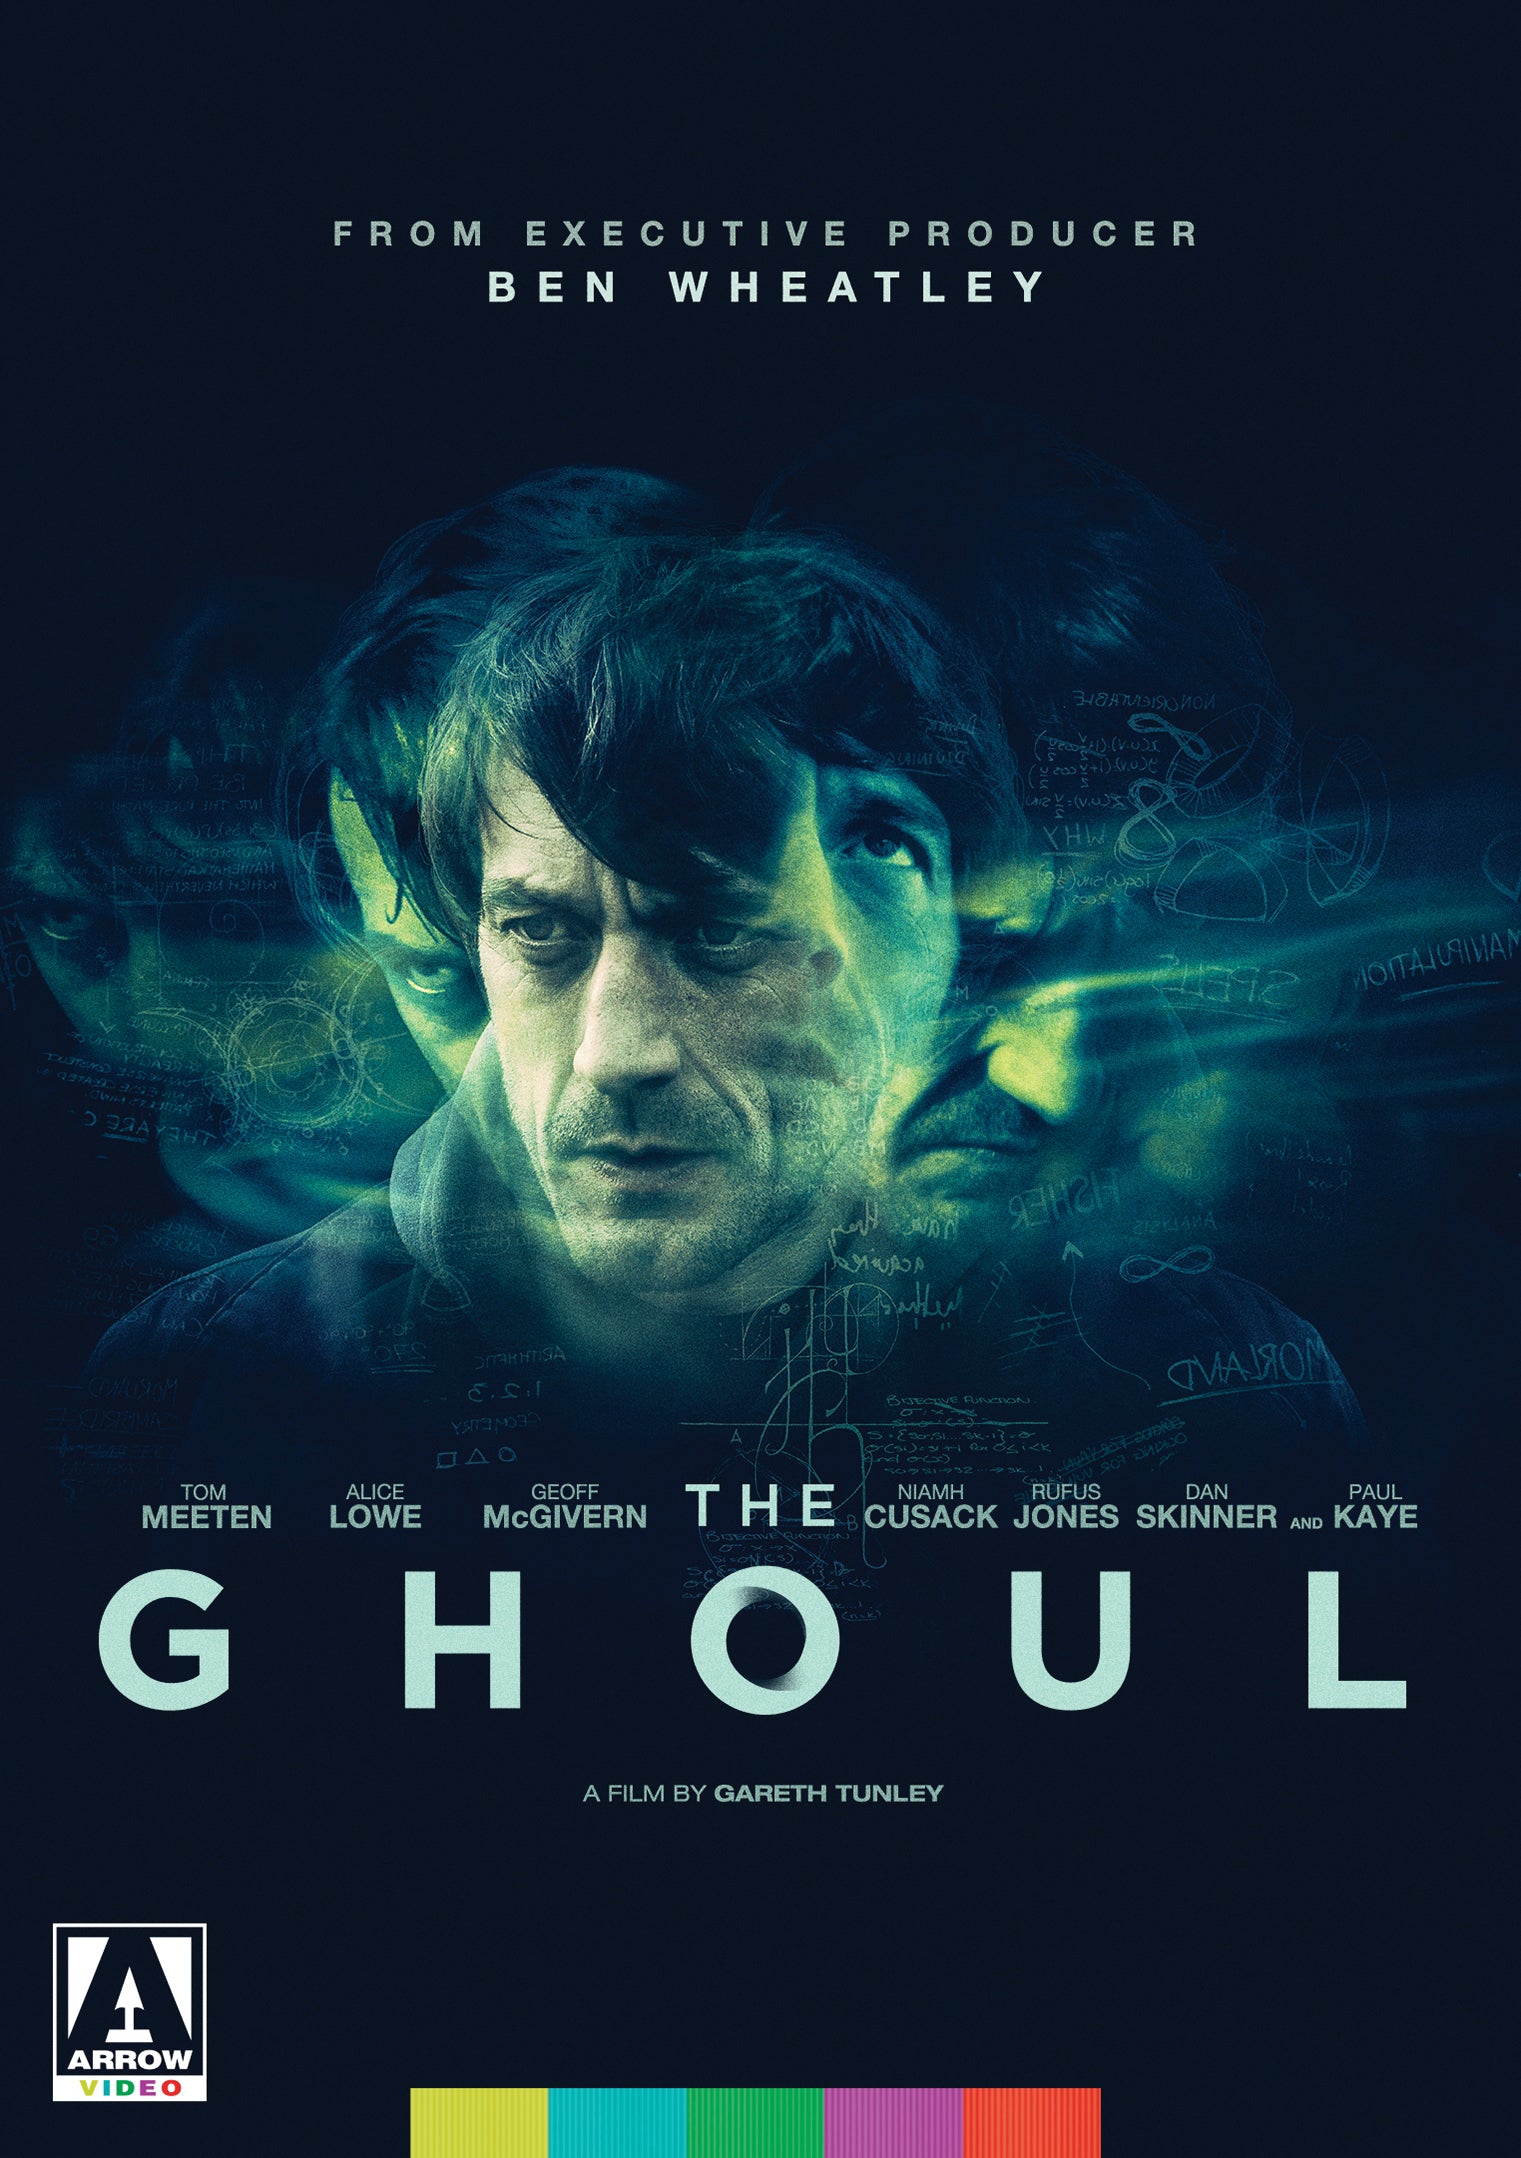 THE GHOUL DVD